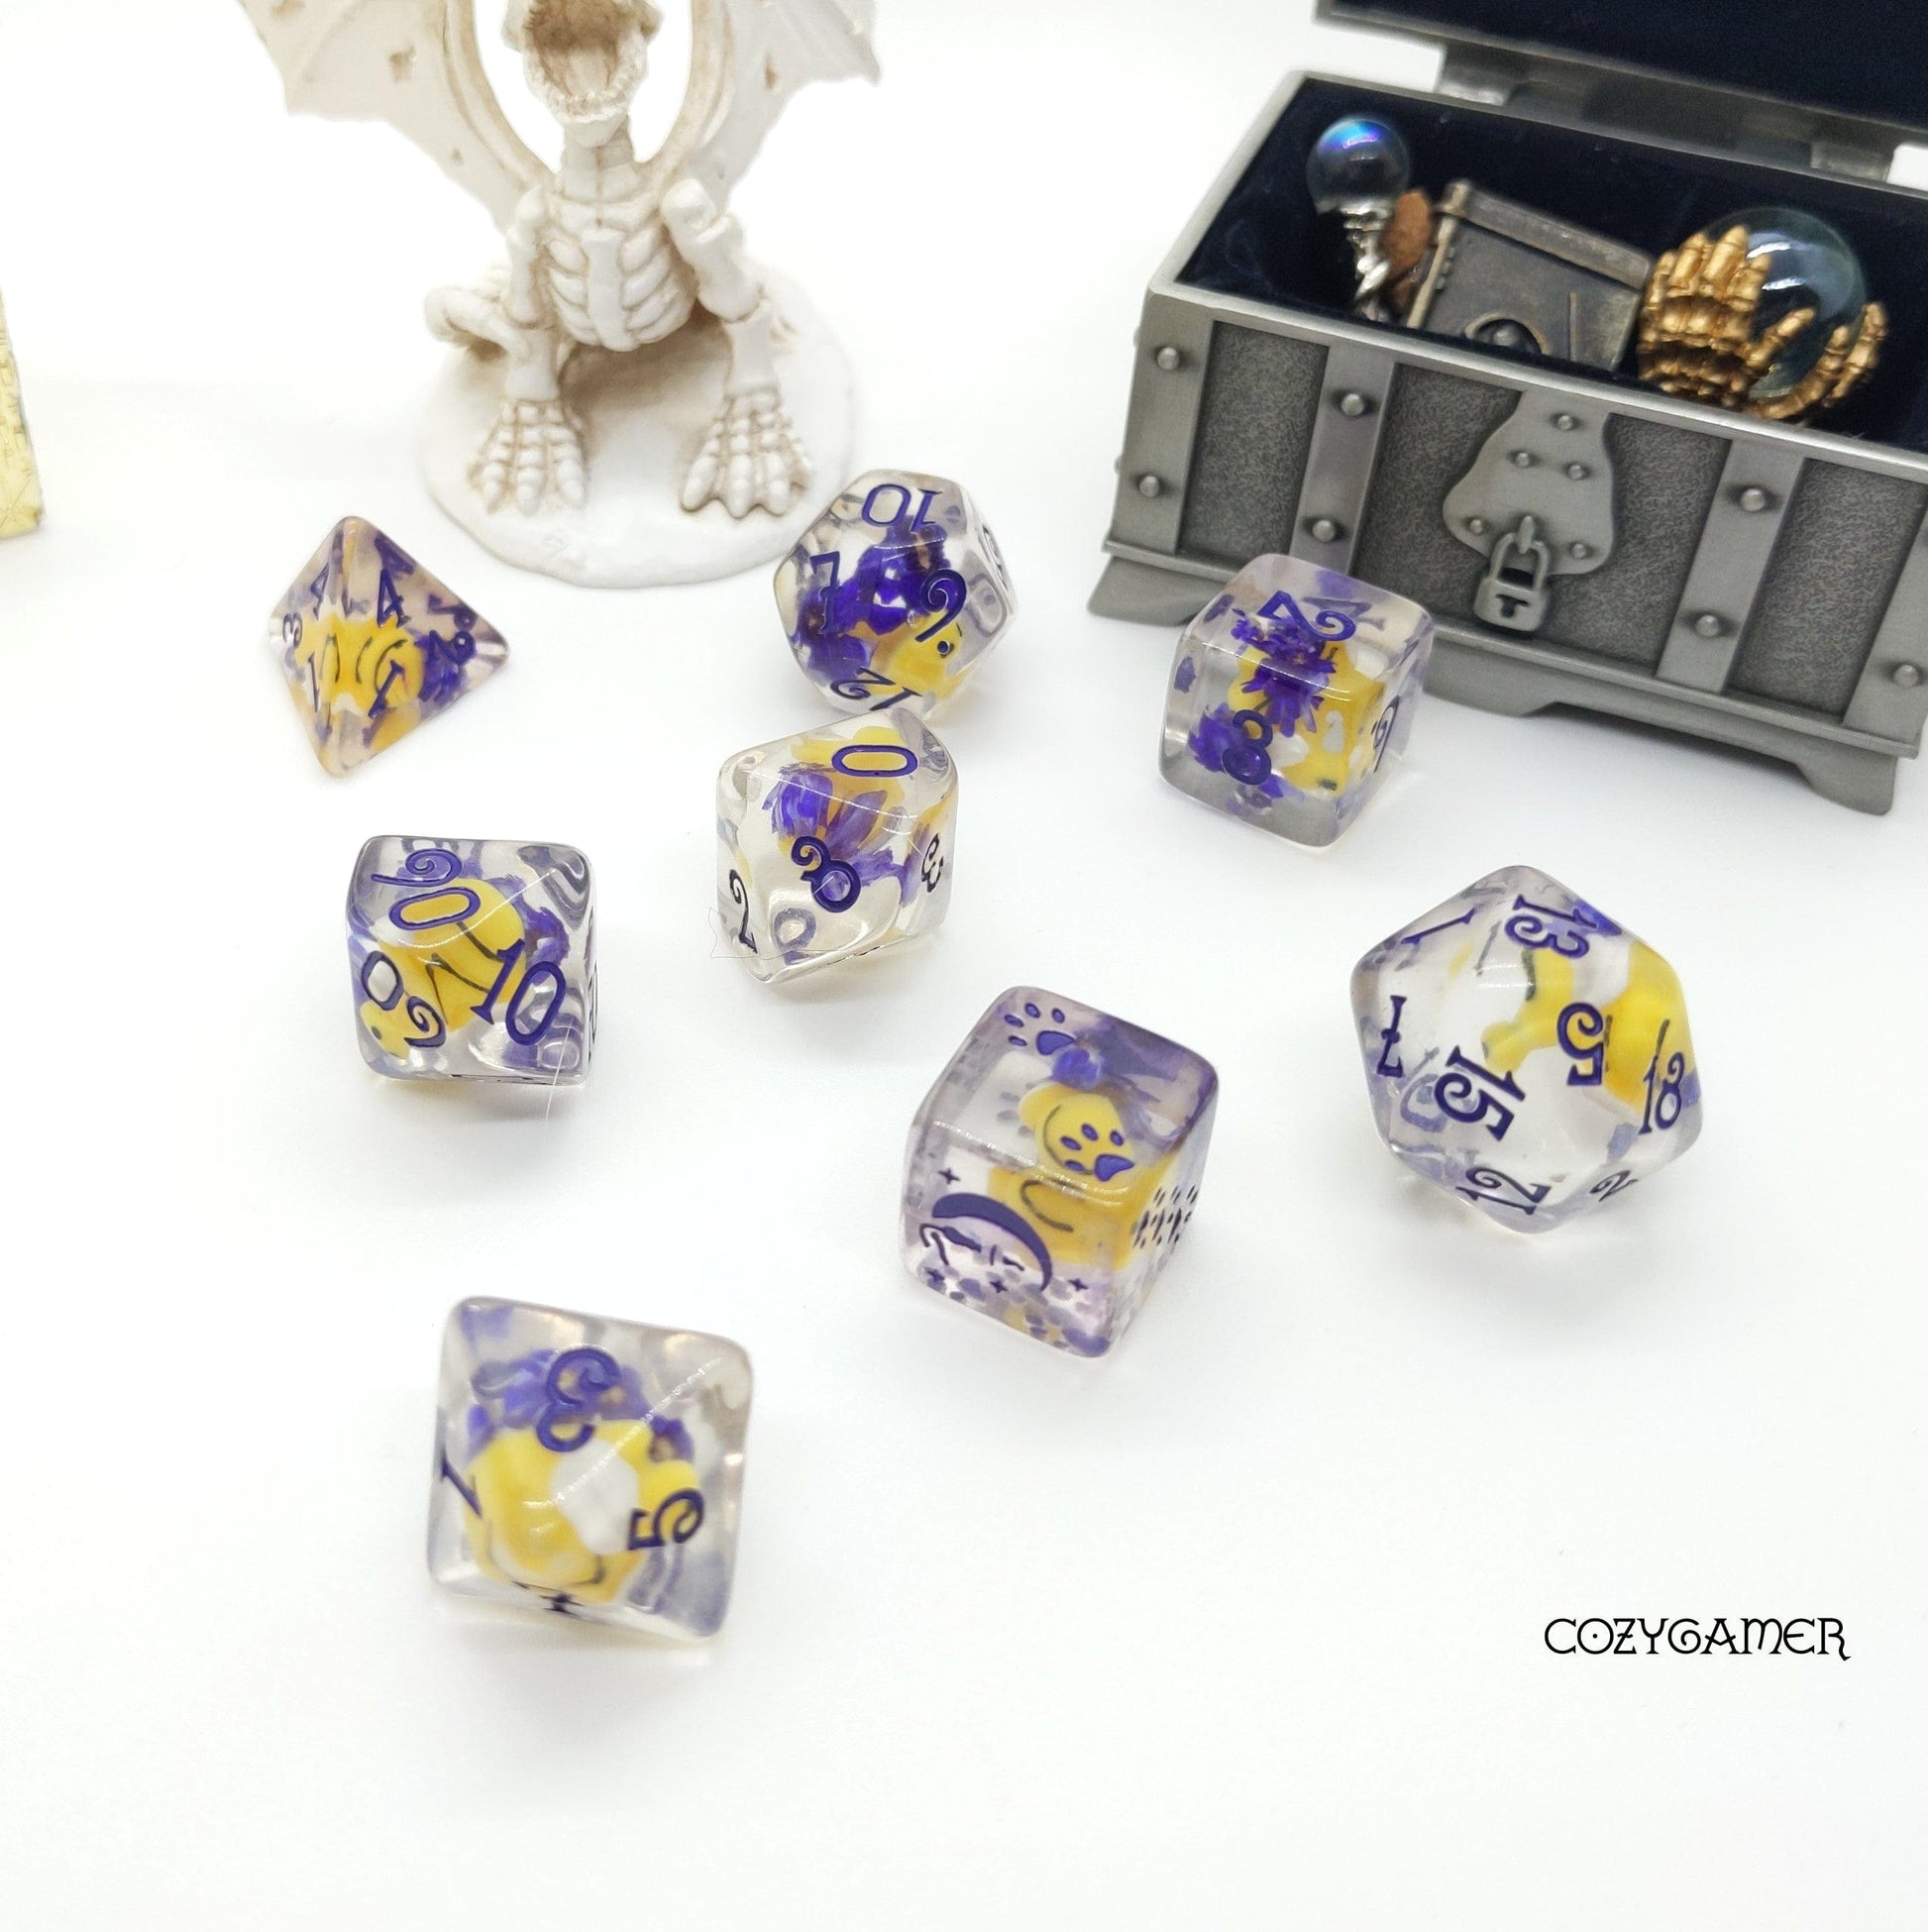 Bees and Flowers Dice Set. 8 Piece Bumble Bees and Dried Flowers